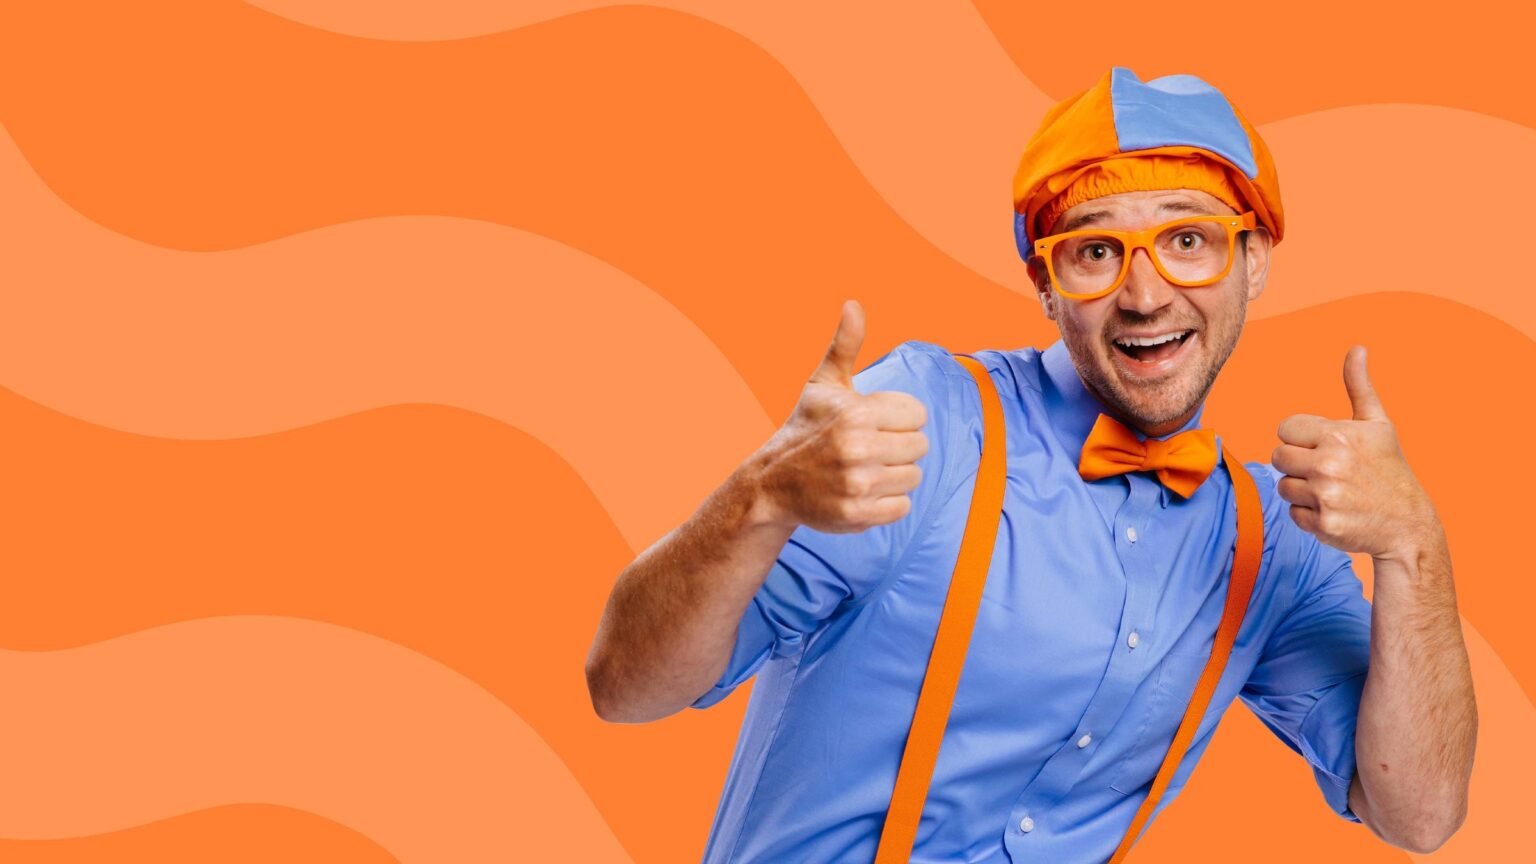 Here’s all you need to know about Blippi, including his net worth and how he became an extremely popular child entertainer.